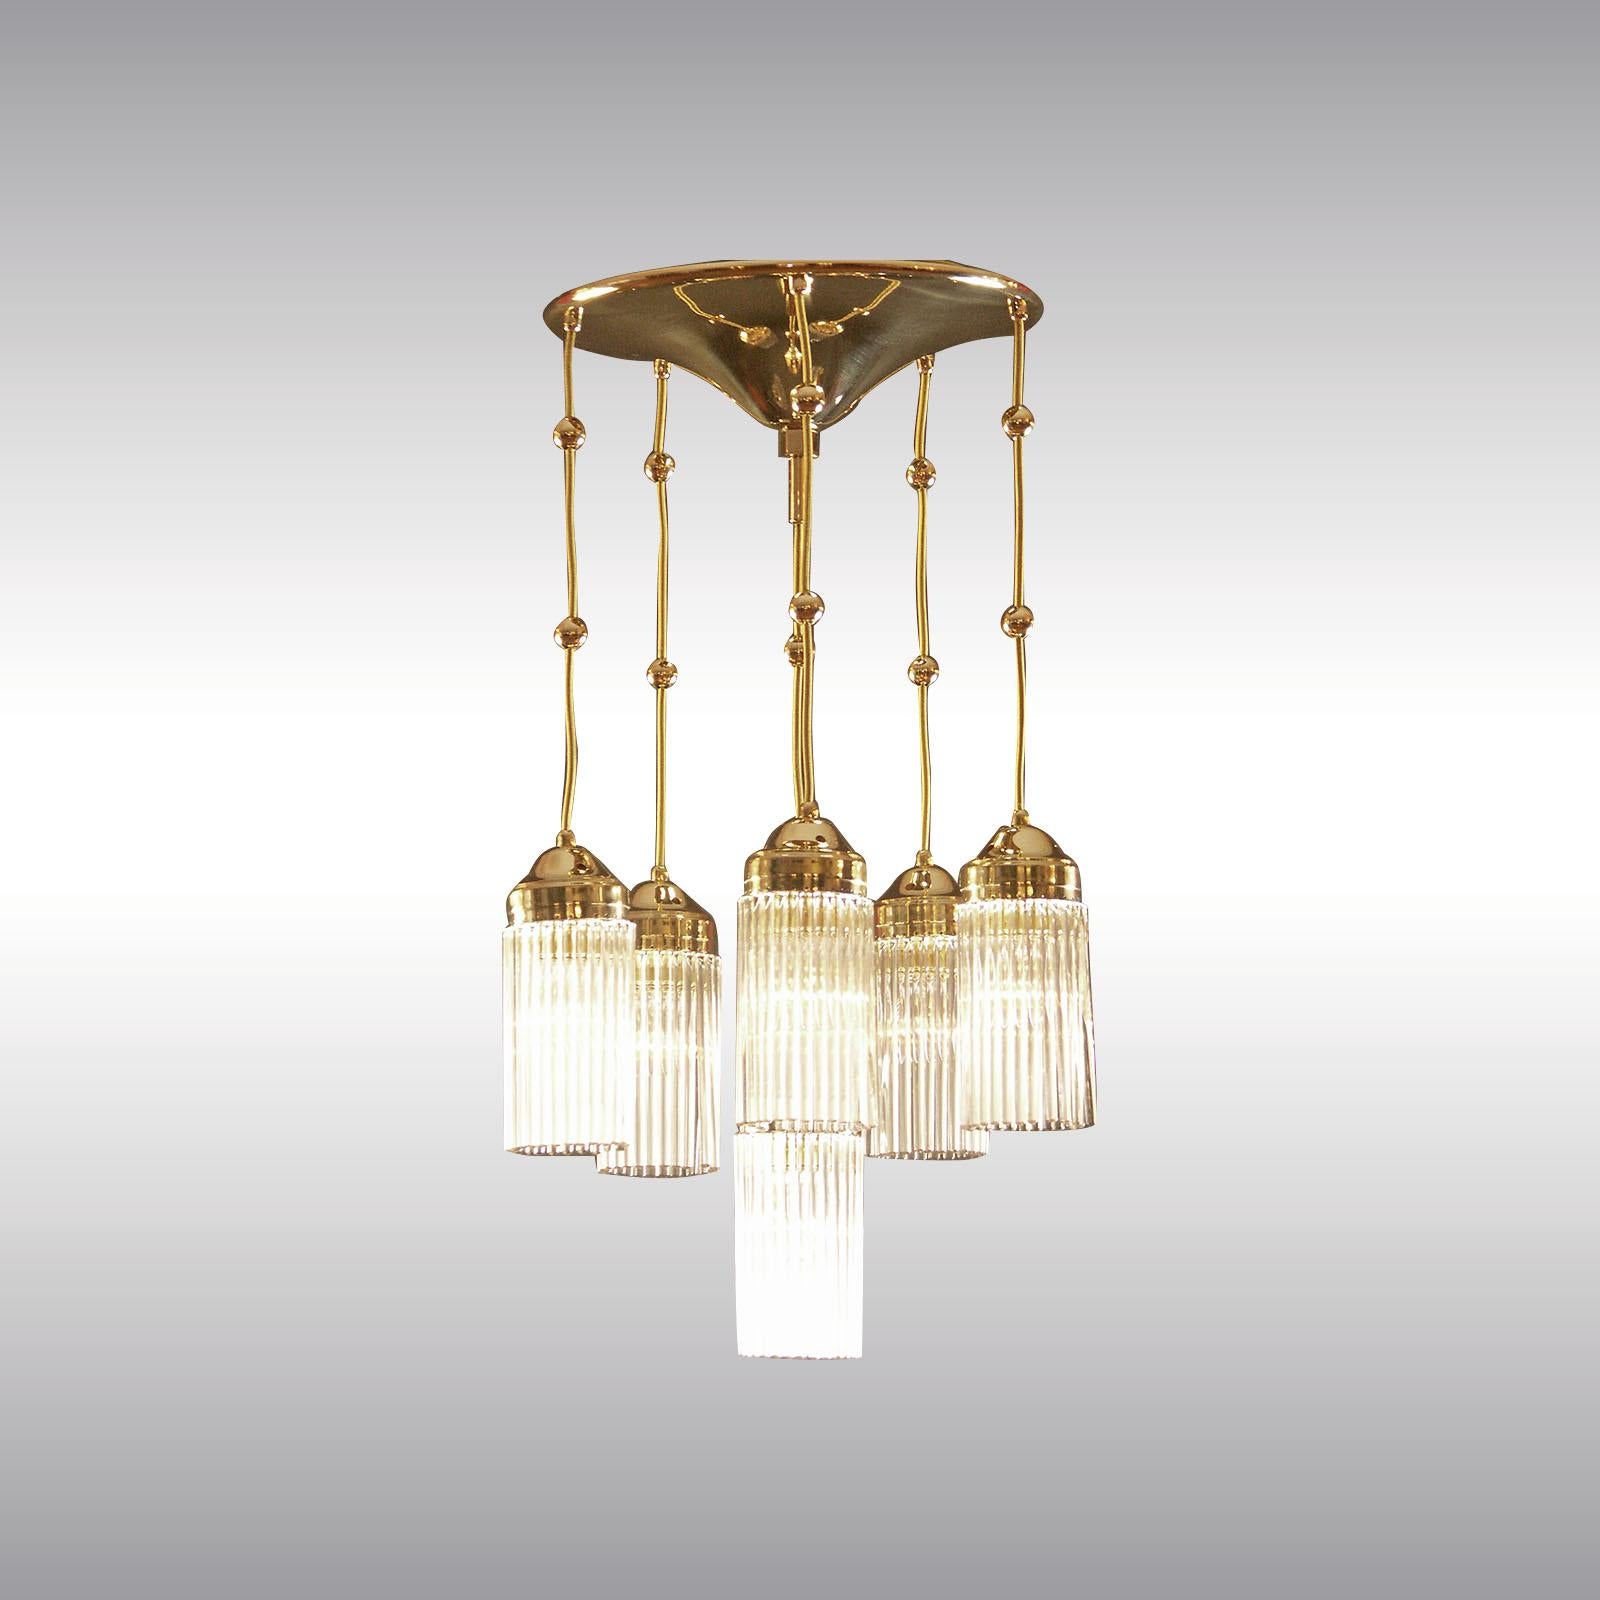 Petite Viennese Jugendstil Art Nouveau Inspired Chandelier In New Condition For Sale In Vienna, AT